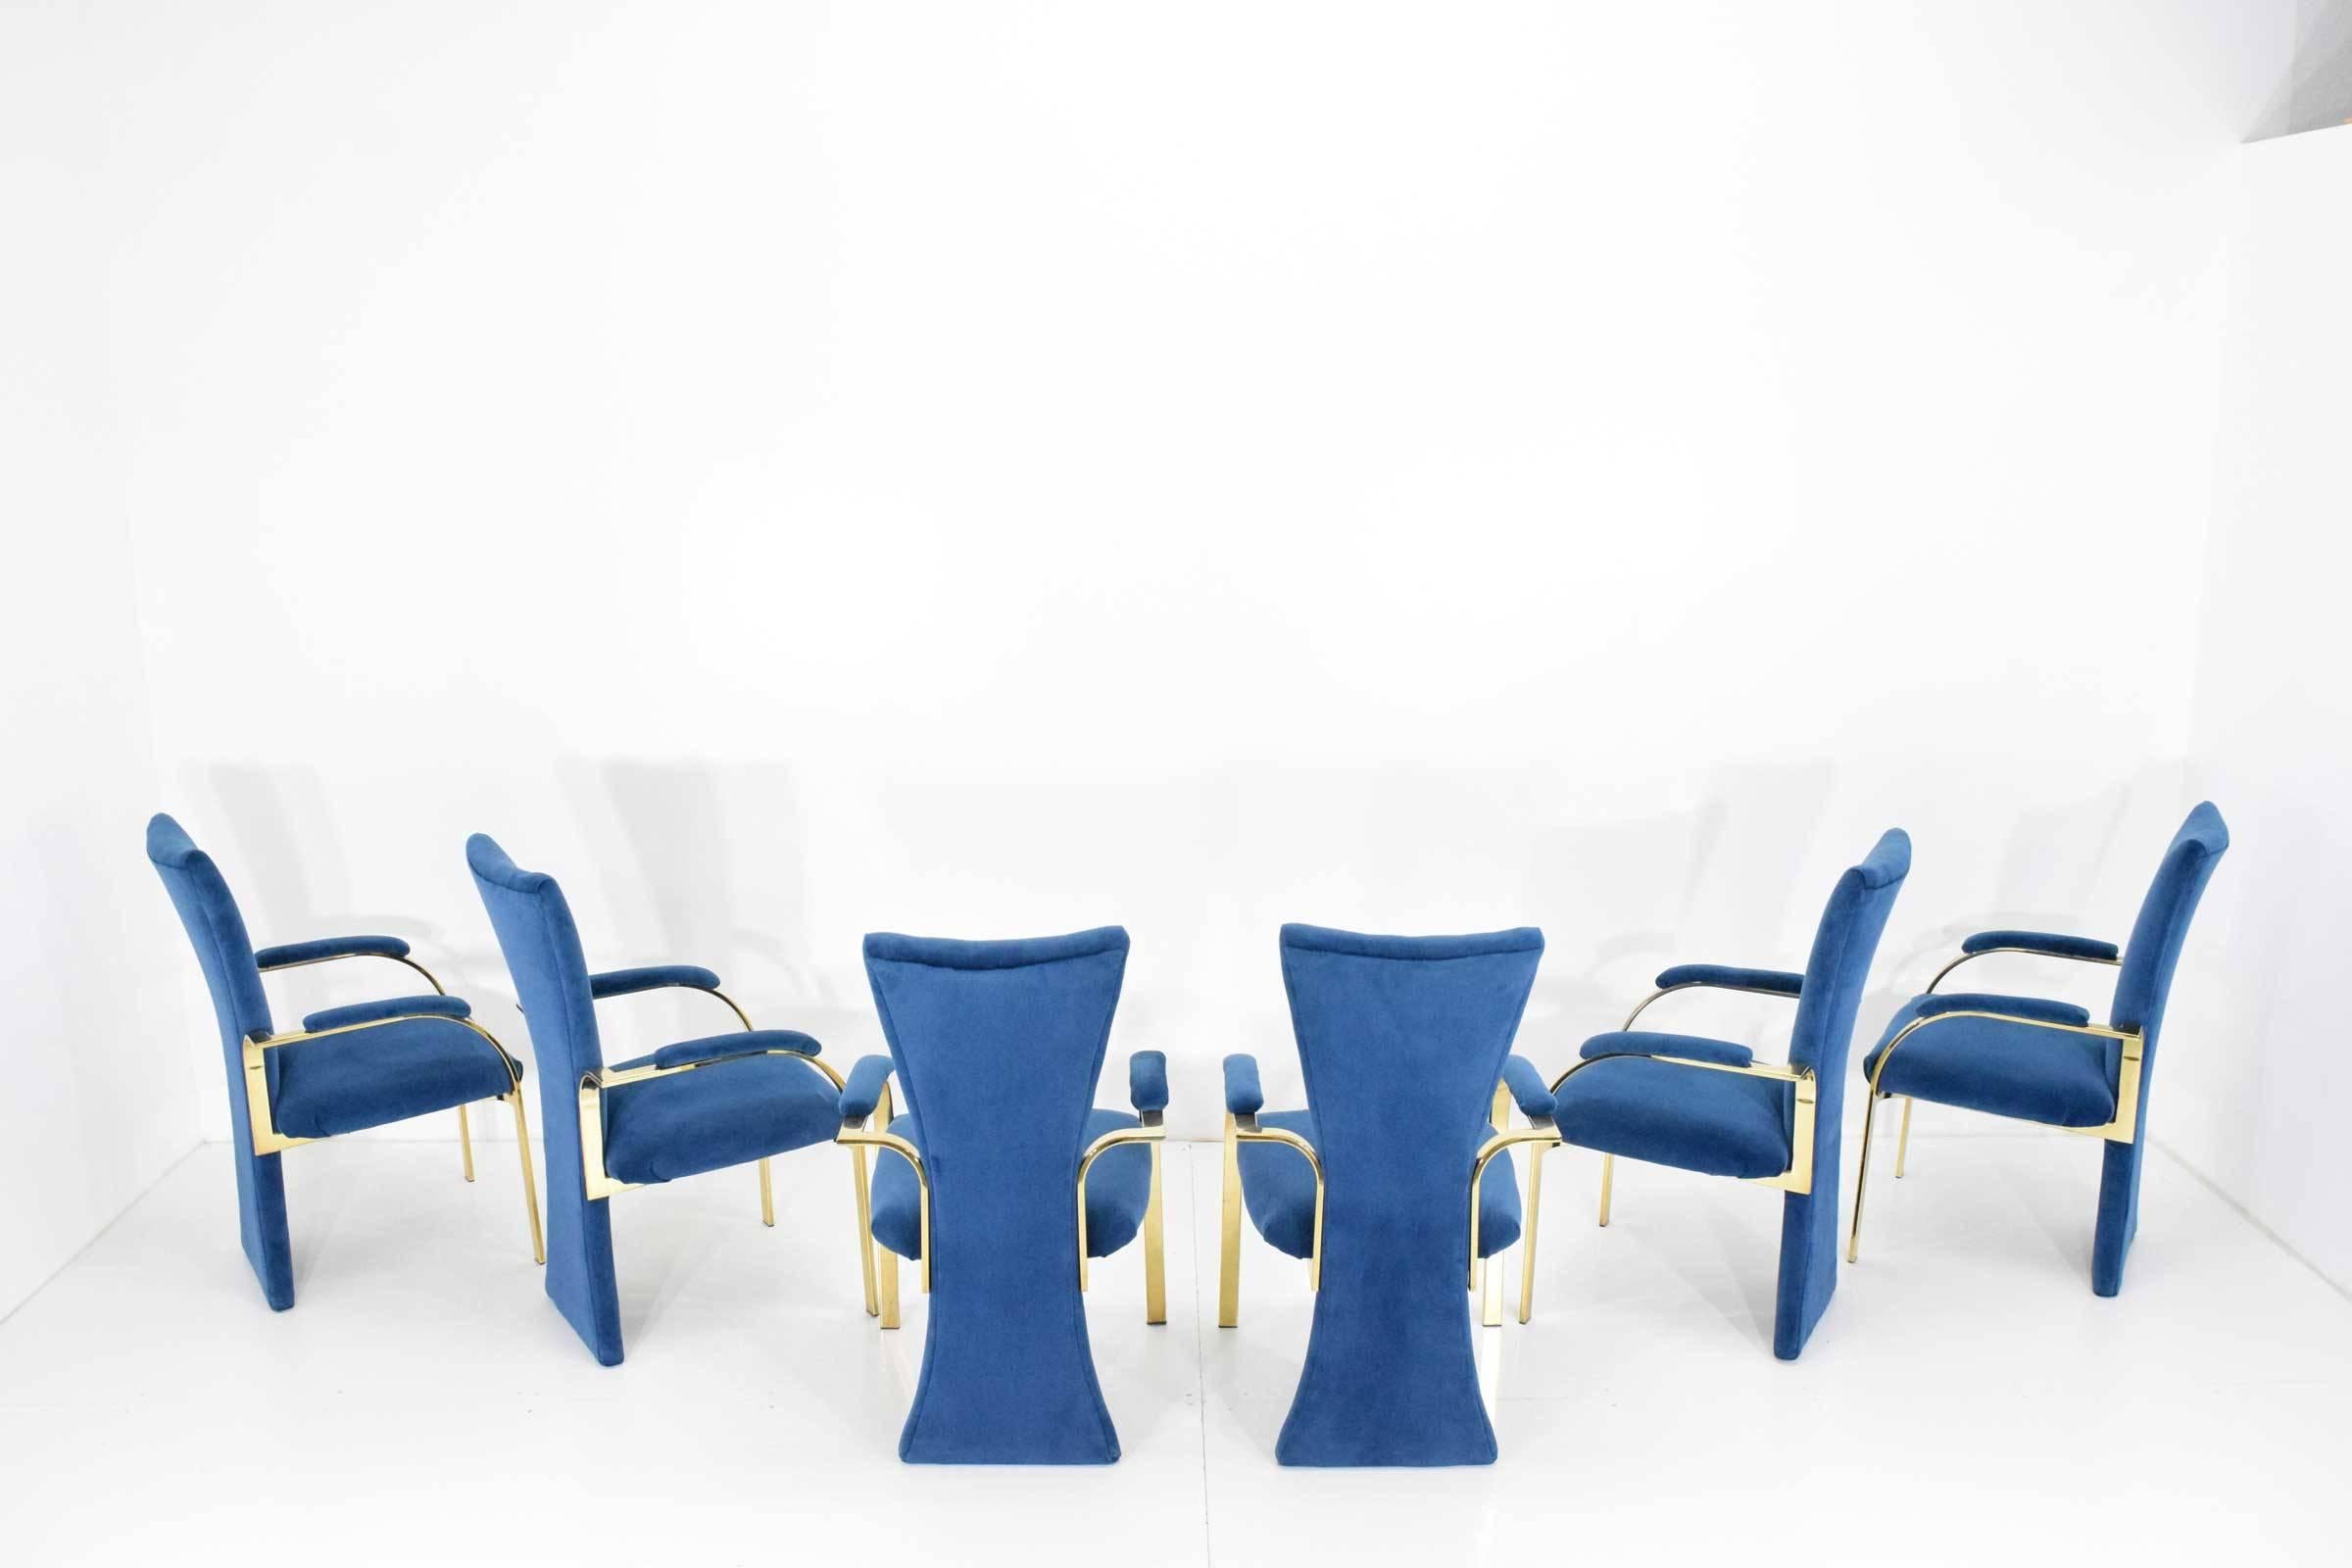 These high-style chairs make a statement. Beautiful velvety blue fabric with brass finish frames. Milo Baughman style. Distributed by Carson's of High Point. These can be reupholstered if desired.